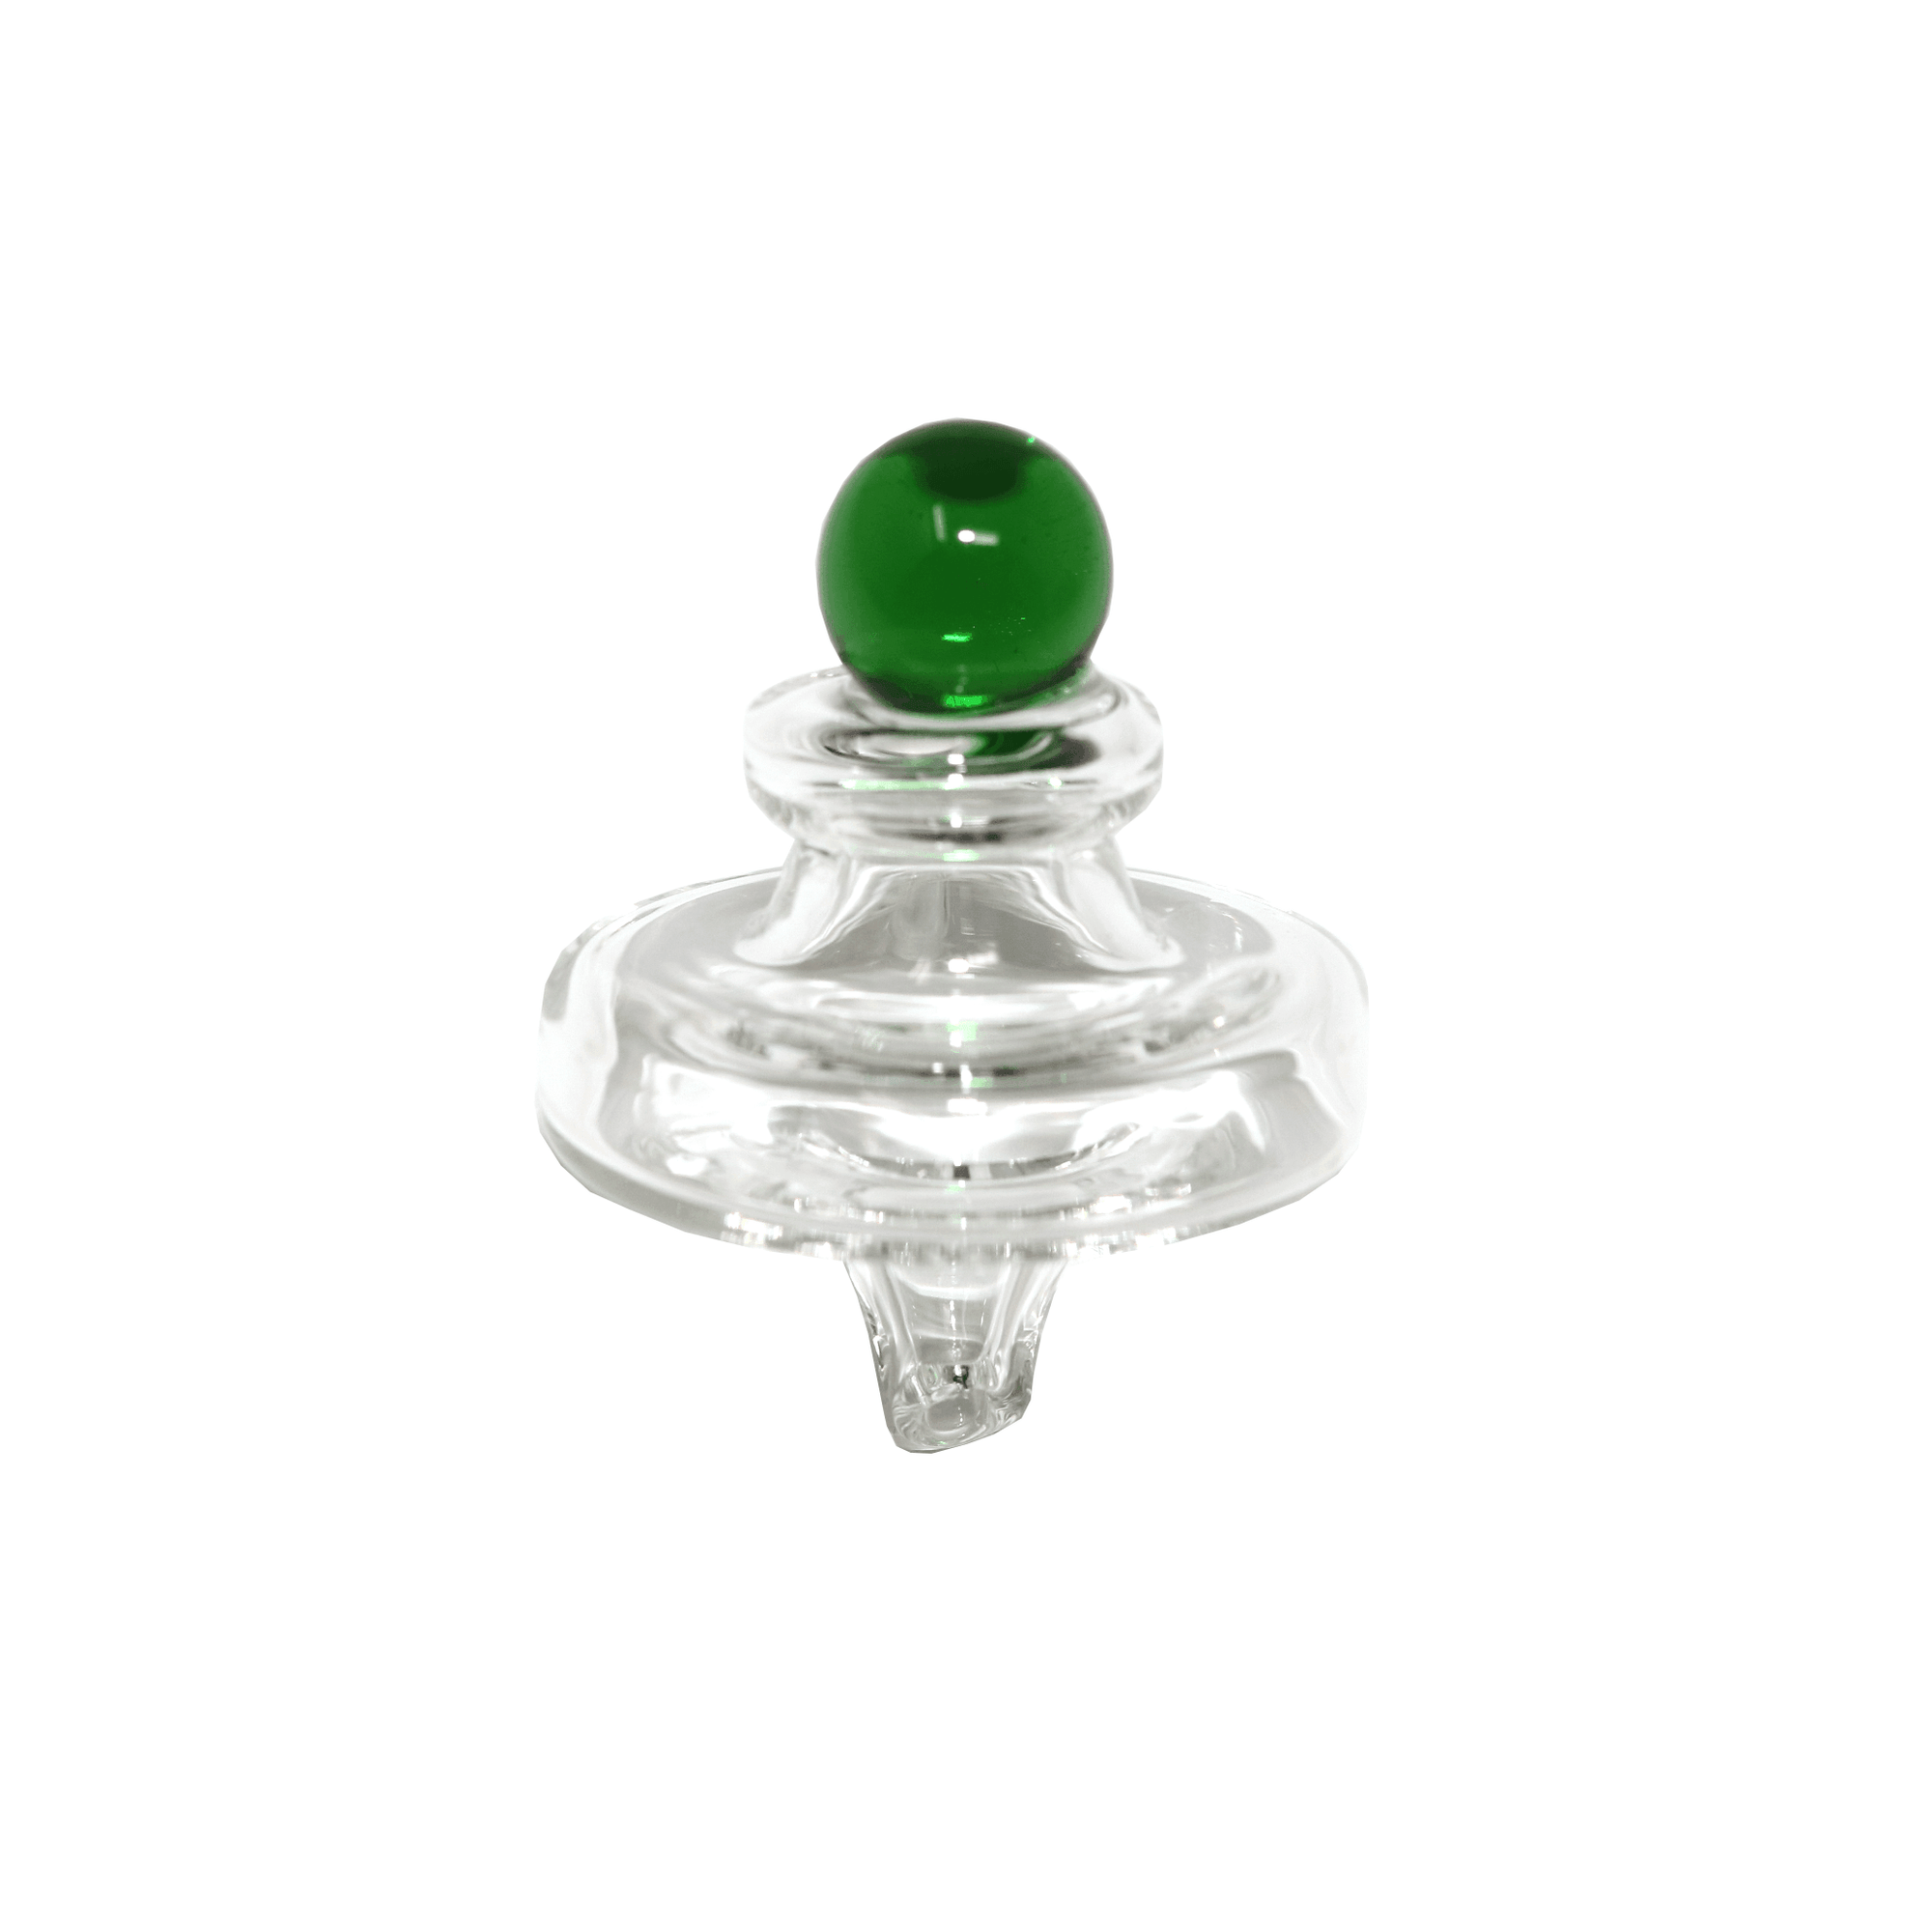 Quartz Banger Thermal Core Reactor | 18mm Male With Saucer Cap | the dabbing specialists